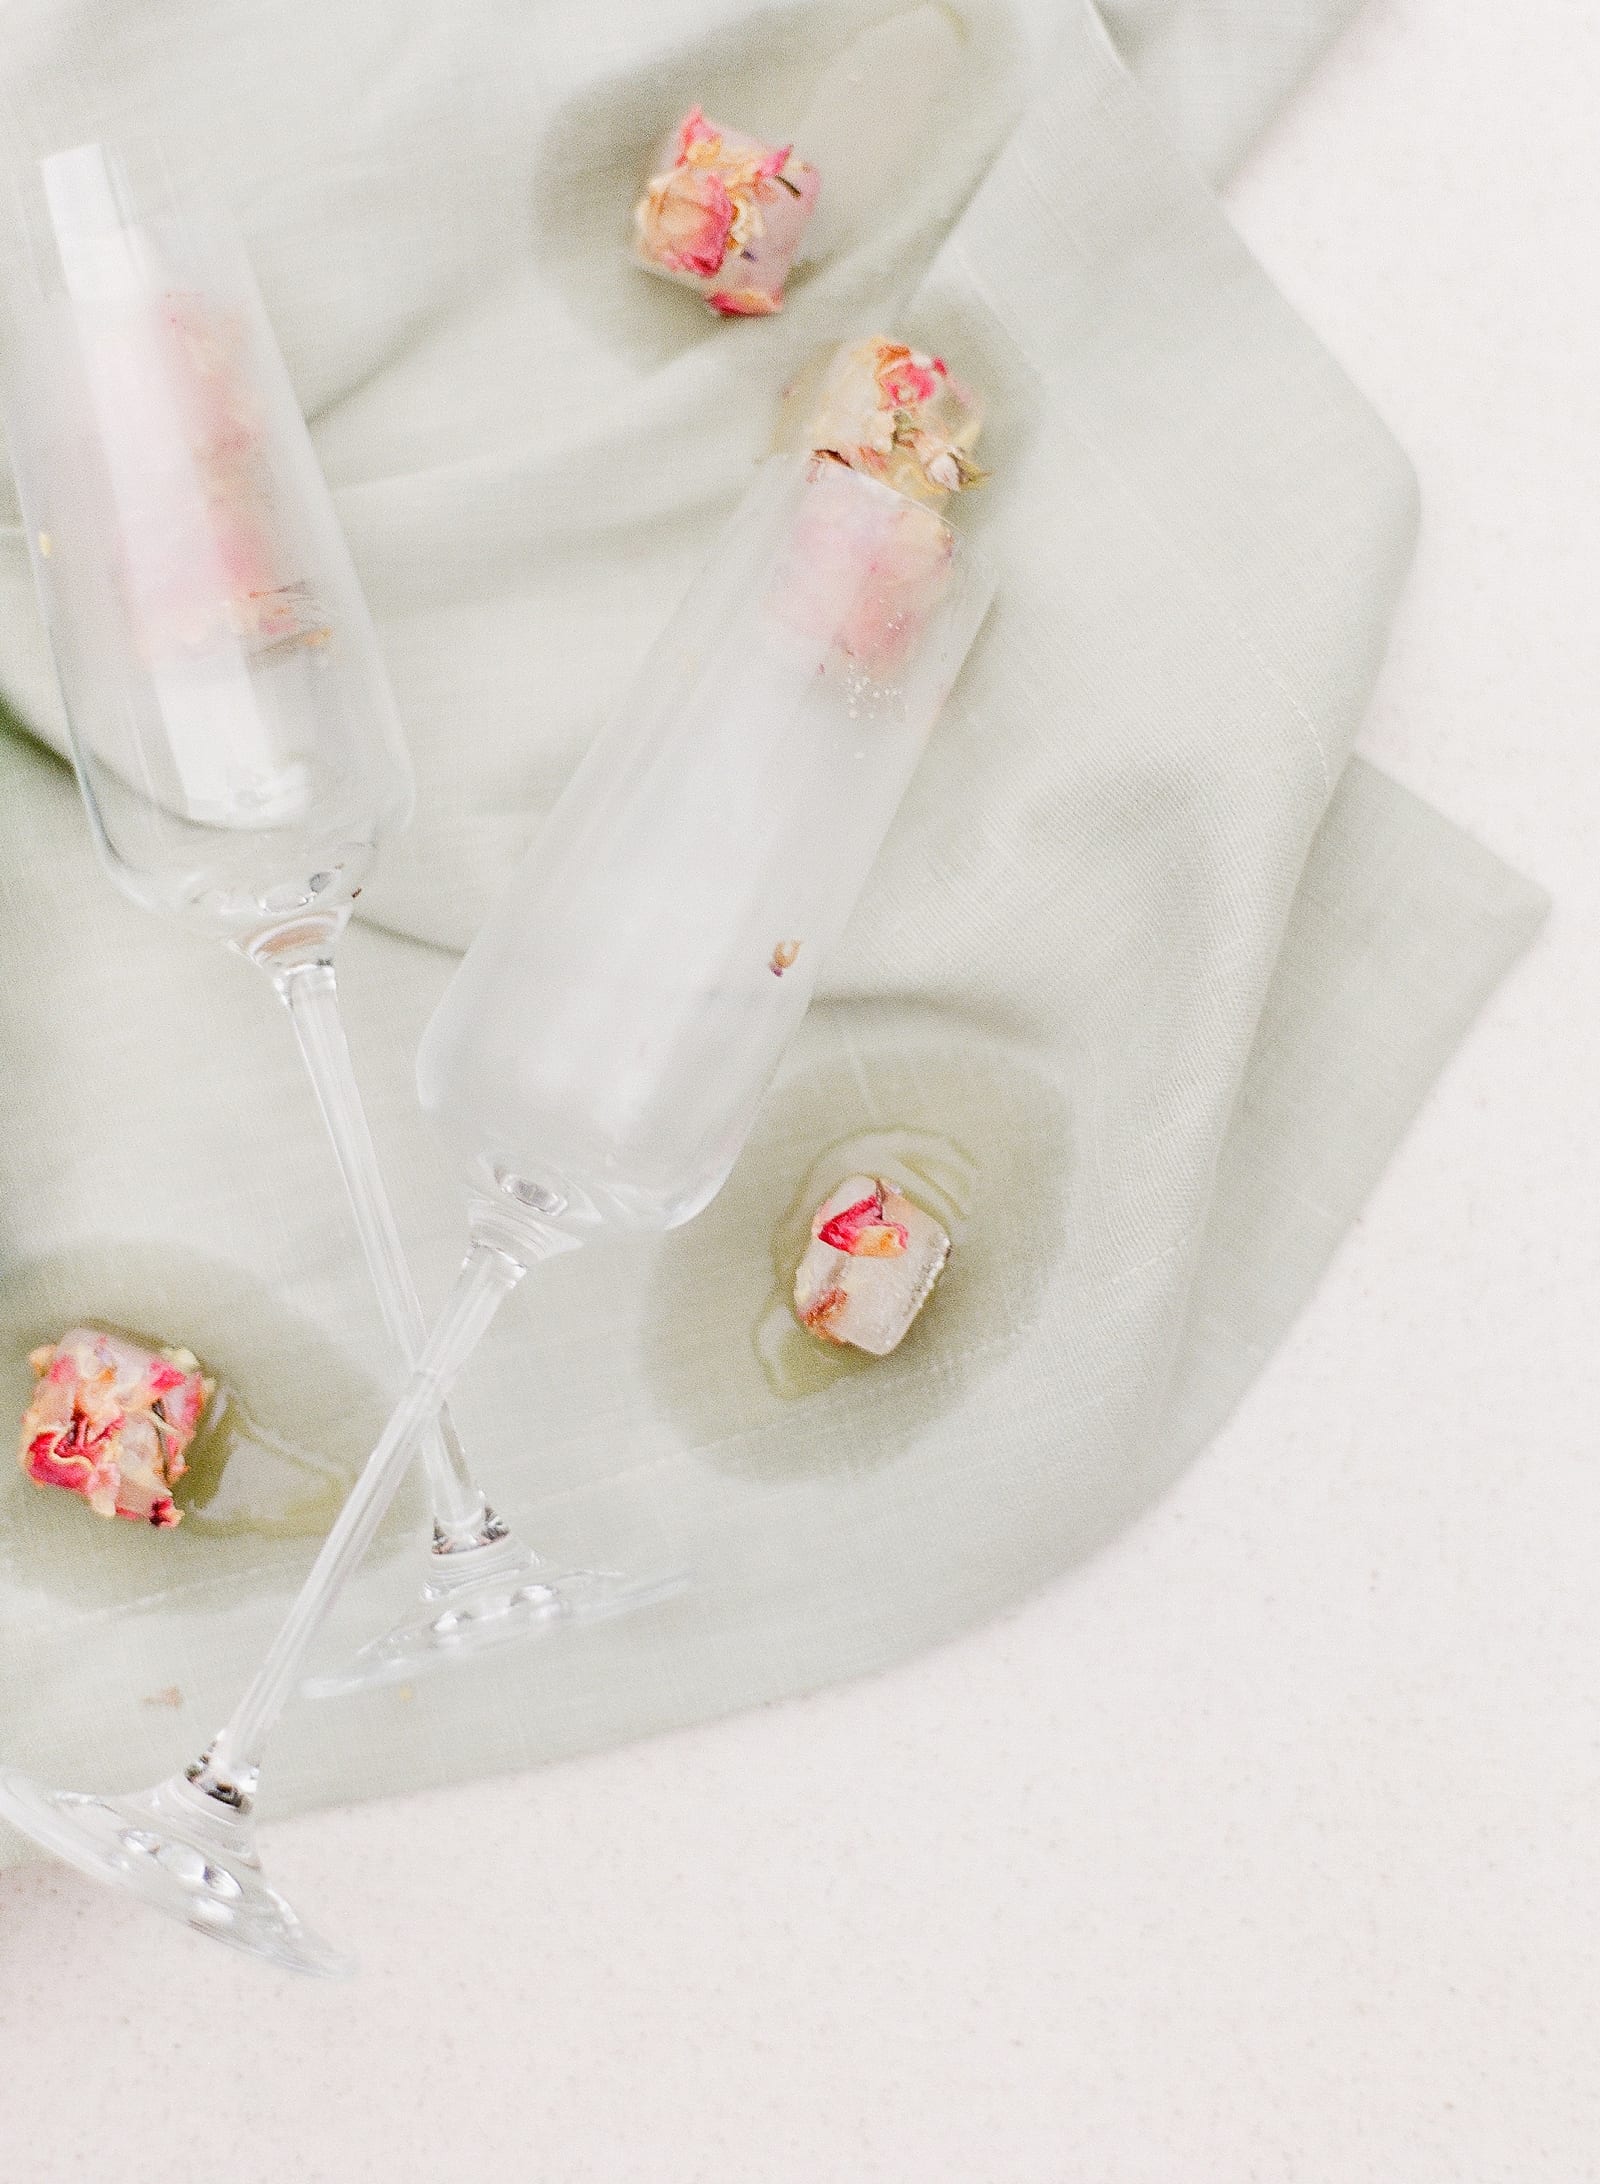 Champagne Glasses with Ice Cubes Photo